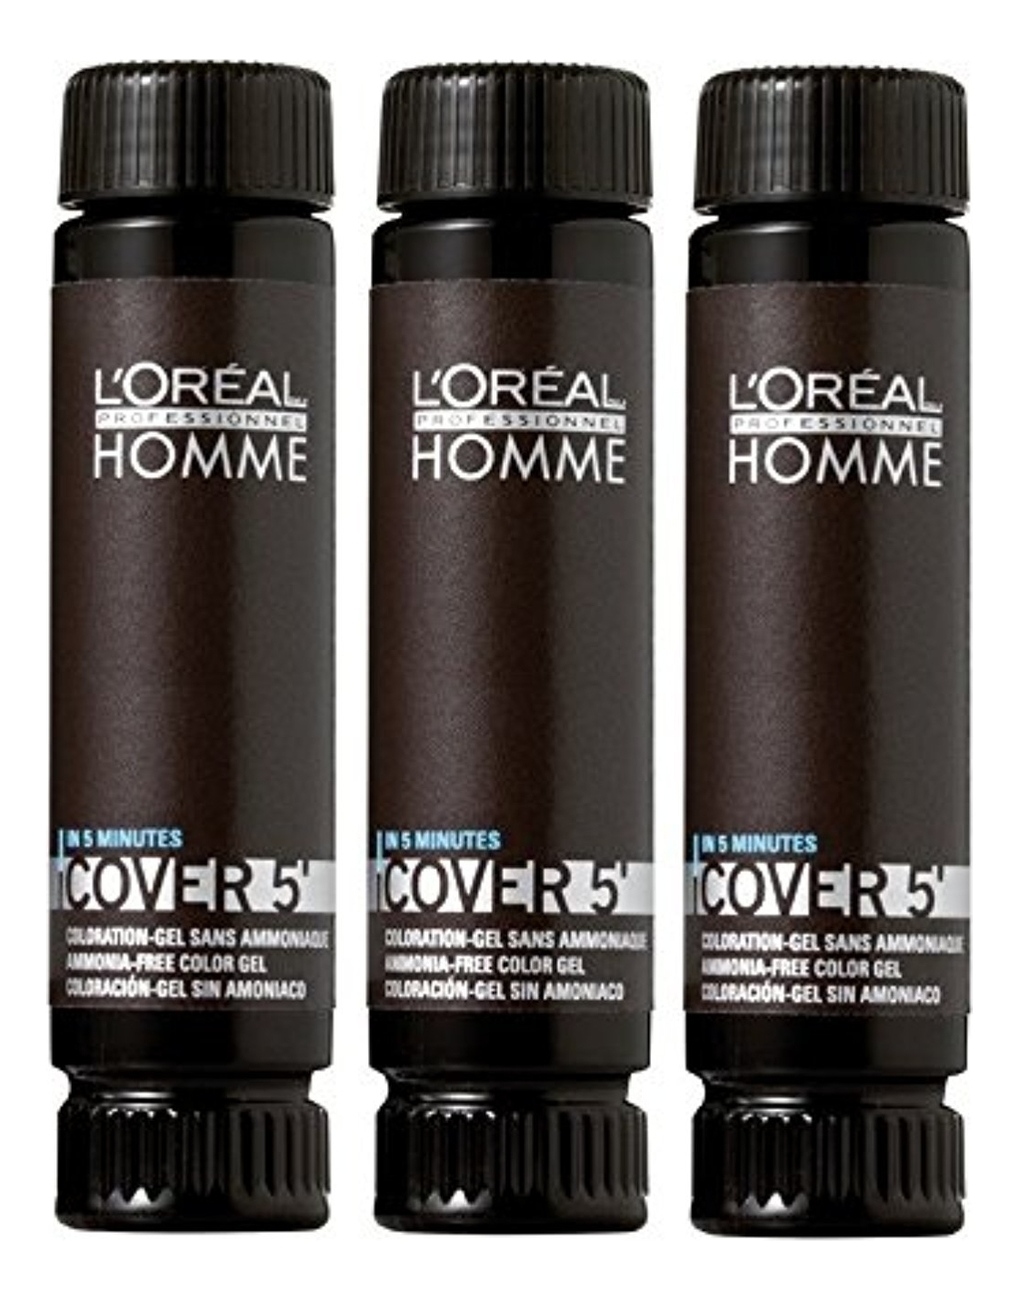 Loreal homme. L'Oreal Professionnel homme Cover 5 №5. Loreal Professionnel homme Cover 5 № 3 50мл. Тонирующий гель homme Cover 5 №6. Лореаль homme Cover 5' тонирующий гель 3.